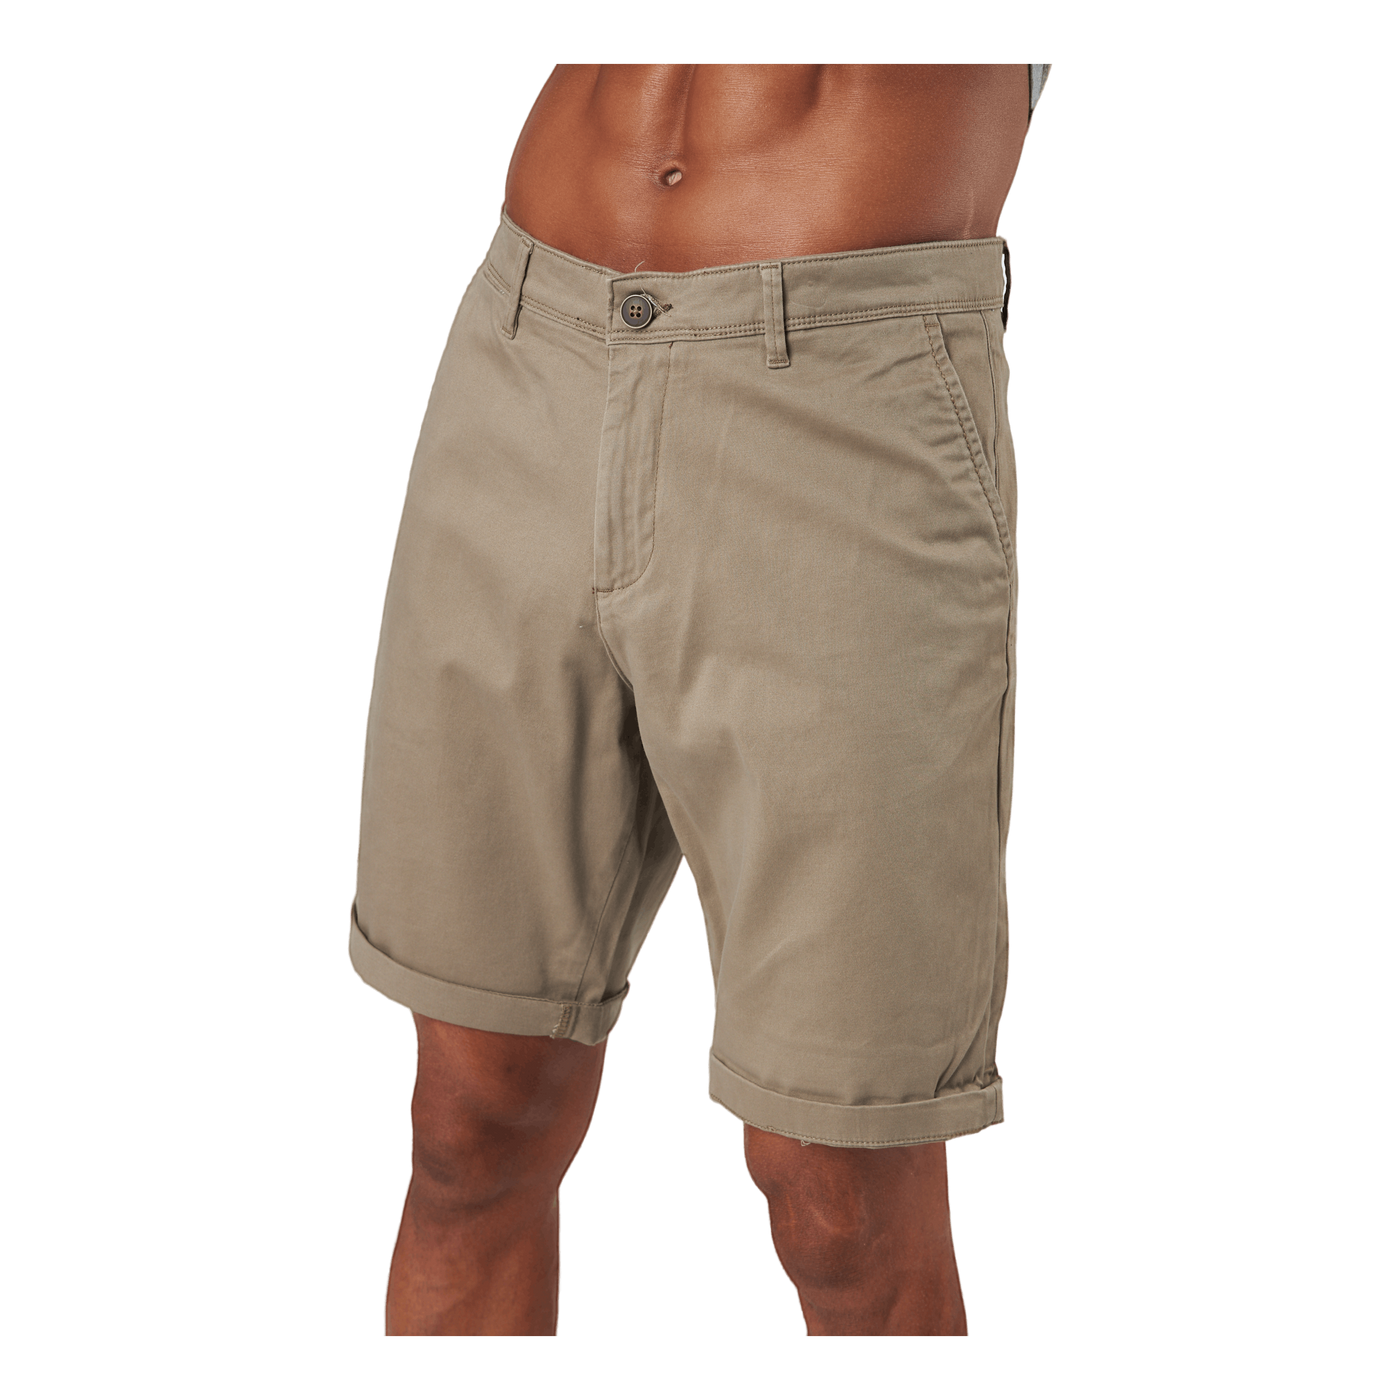 Jpstbowie Jjshorts Solid Sa Sn Beige